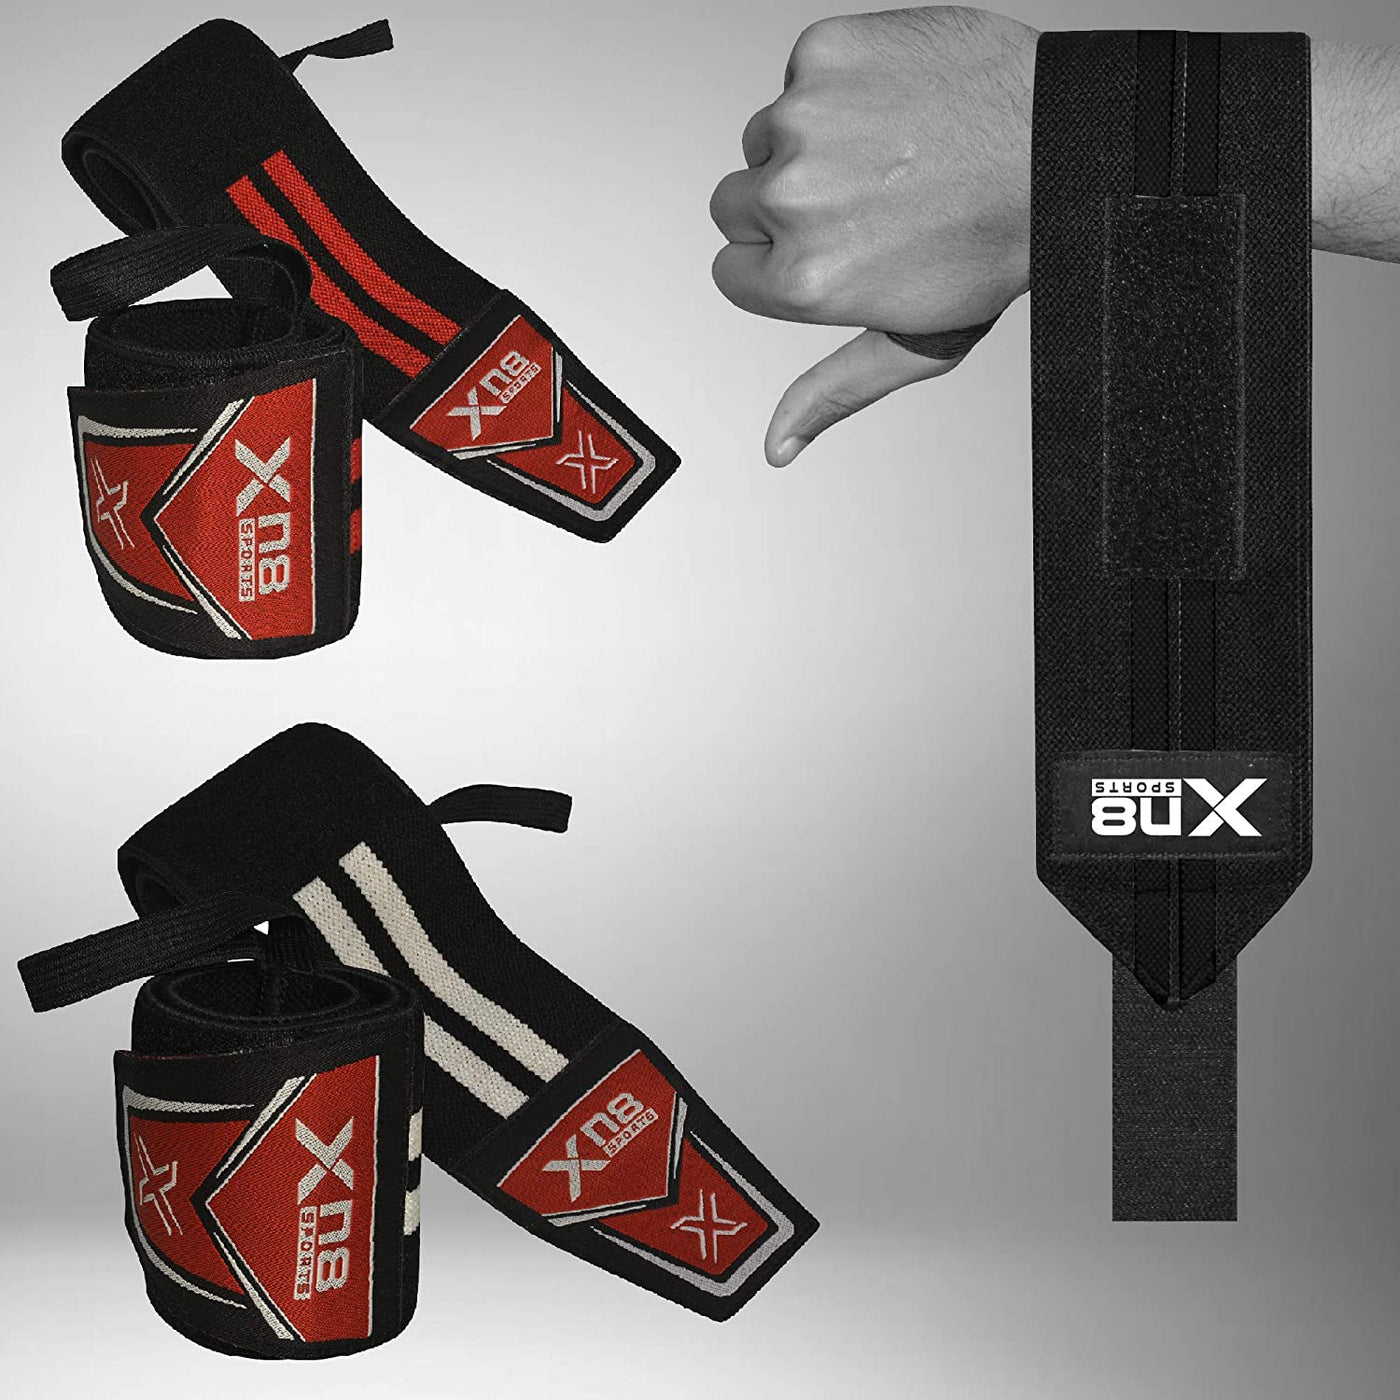 Xn8 Sports Weightlifting Wrist Support - Elasticated Straps for Weight Lifting Deadlift, Bodybuilding, Powerlifting, Gymnastics, Strength Training, Workout